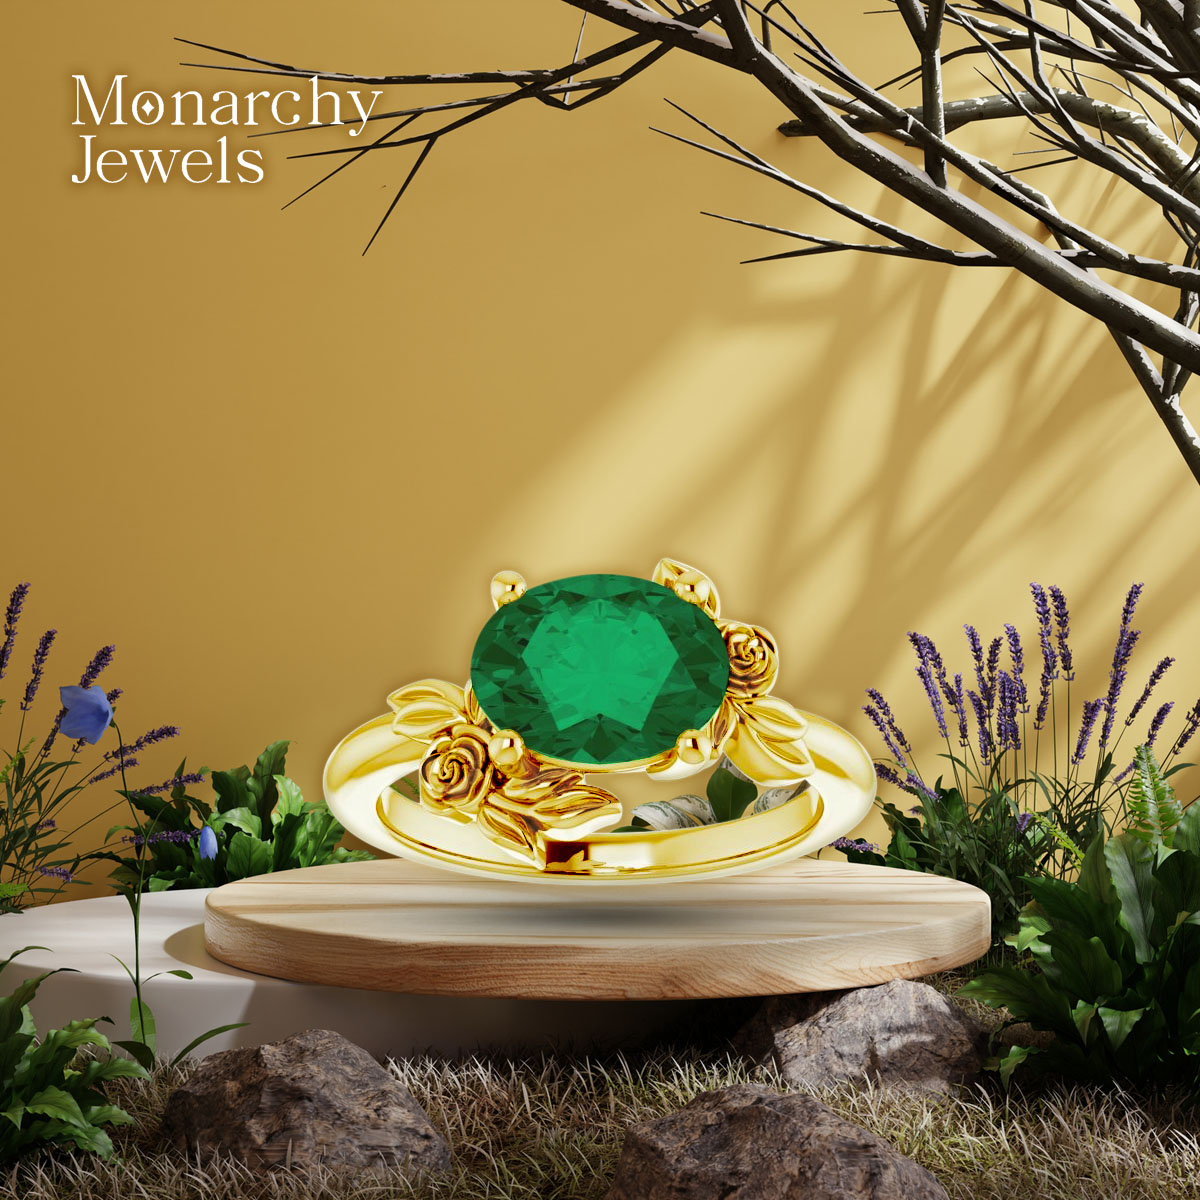 Our Emerald Crystal Rose Ring features a deeply enchanting forest green gemstone, set in 18k Yellow Gold. The perfect birthstone gift for someone with a birthday in May.
#MonarchyJewels #EmeraldJewelry #Emerald #BirthstoneJewelry #MayBirthstone #RoseRing #Gemstones